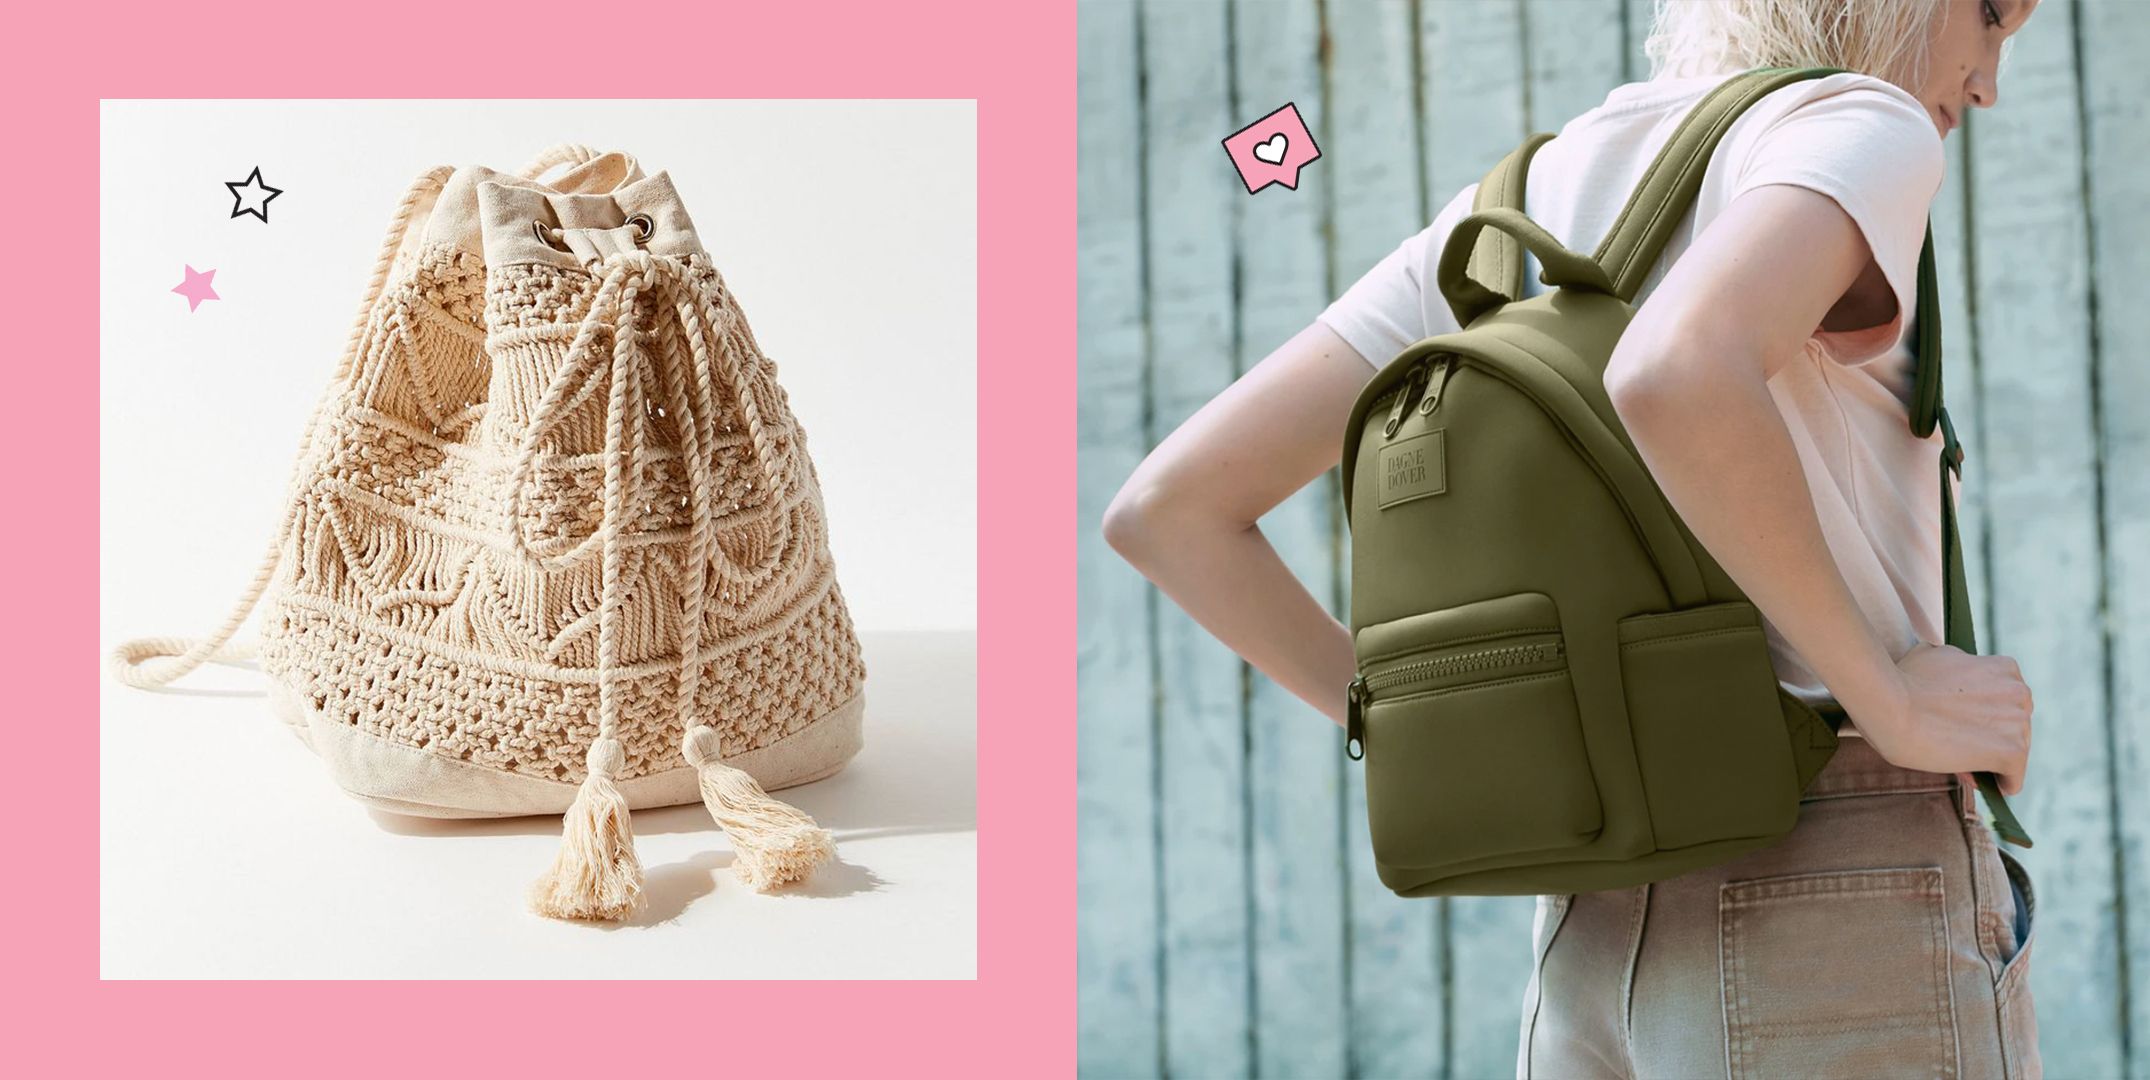 The 20 Coolest Small Backpack Purses to Buy This Summer